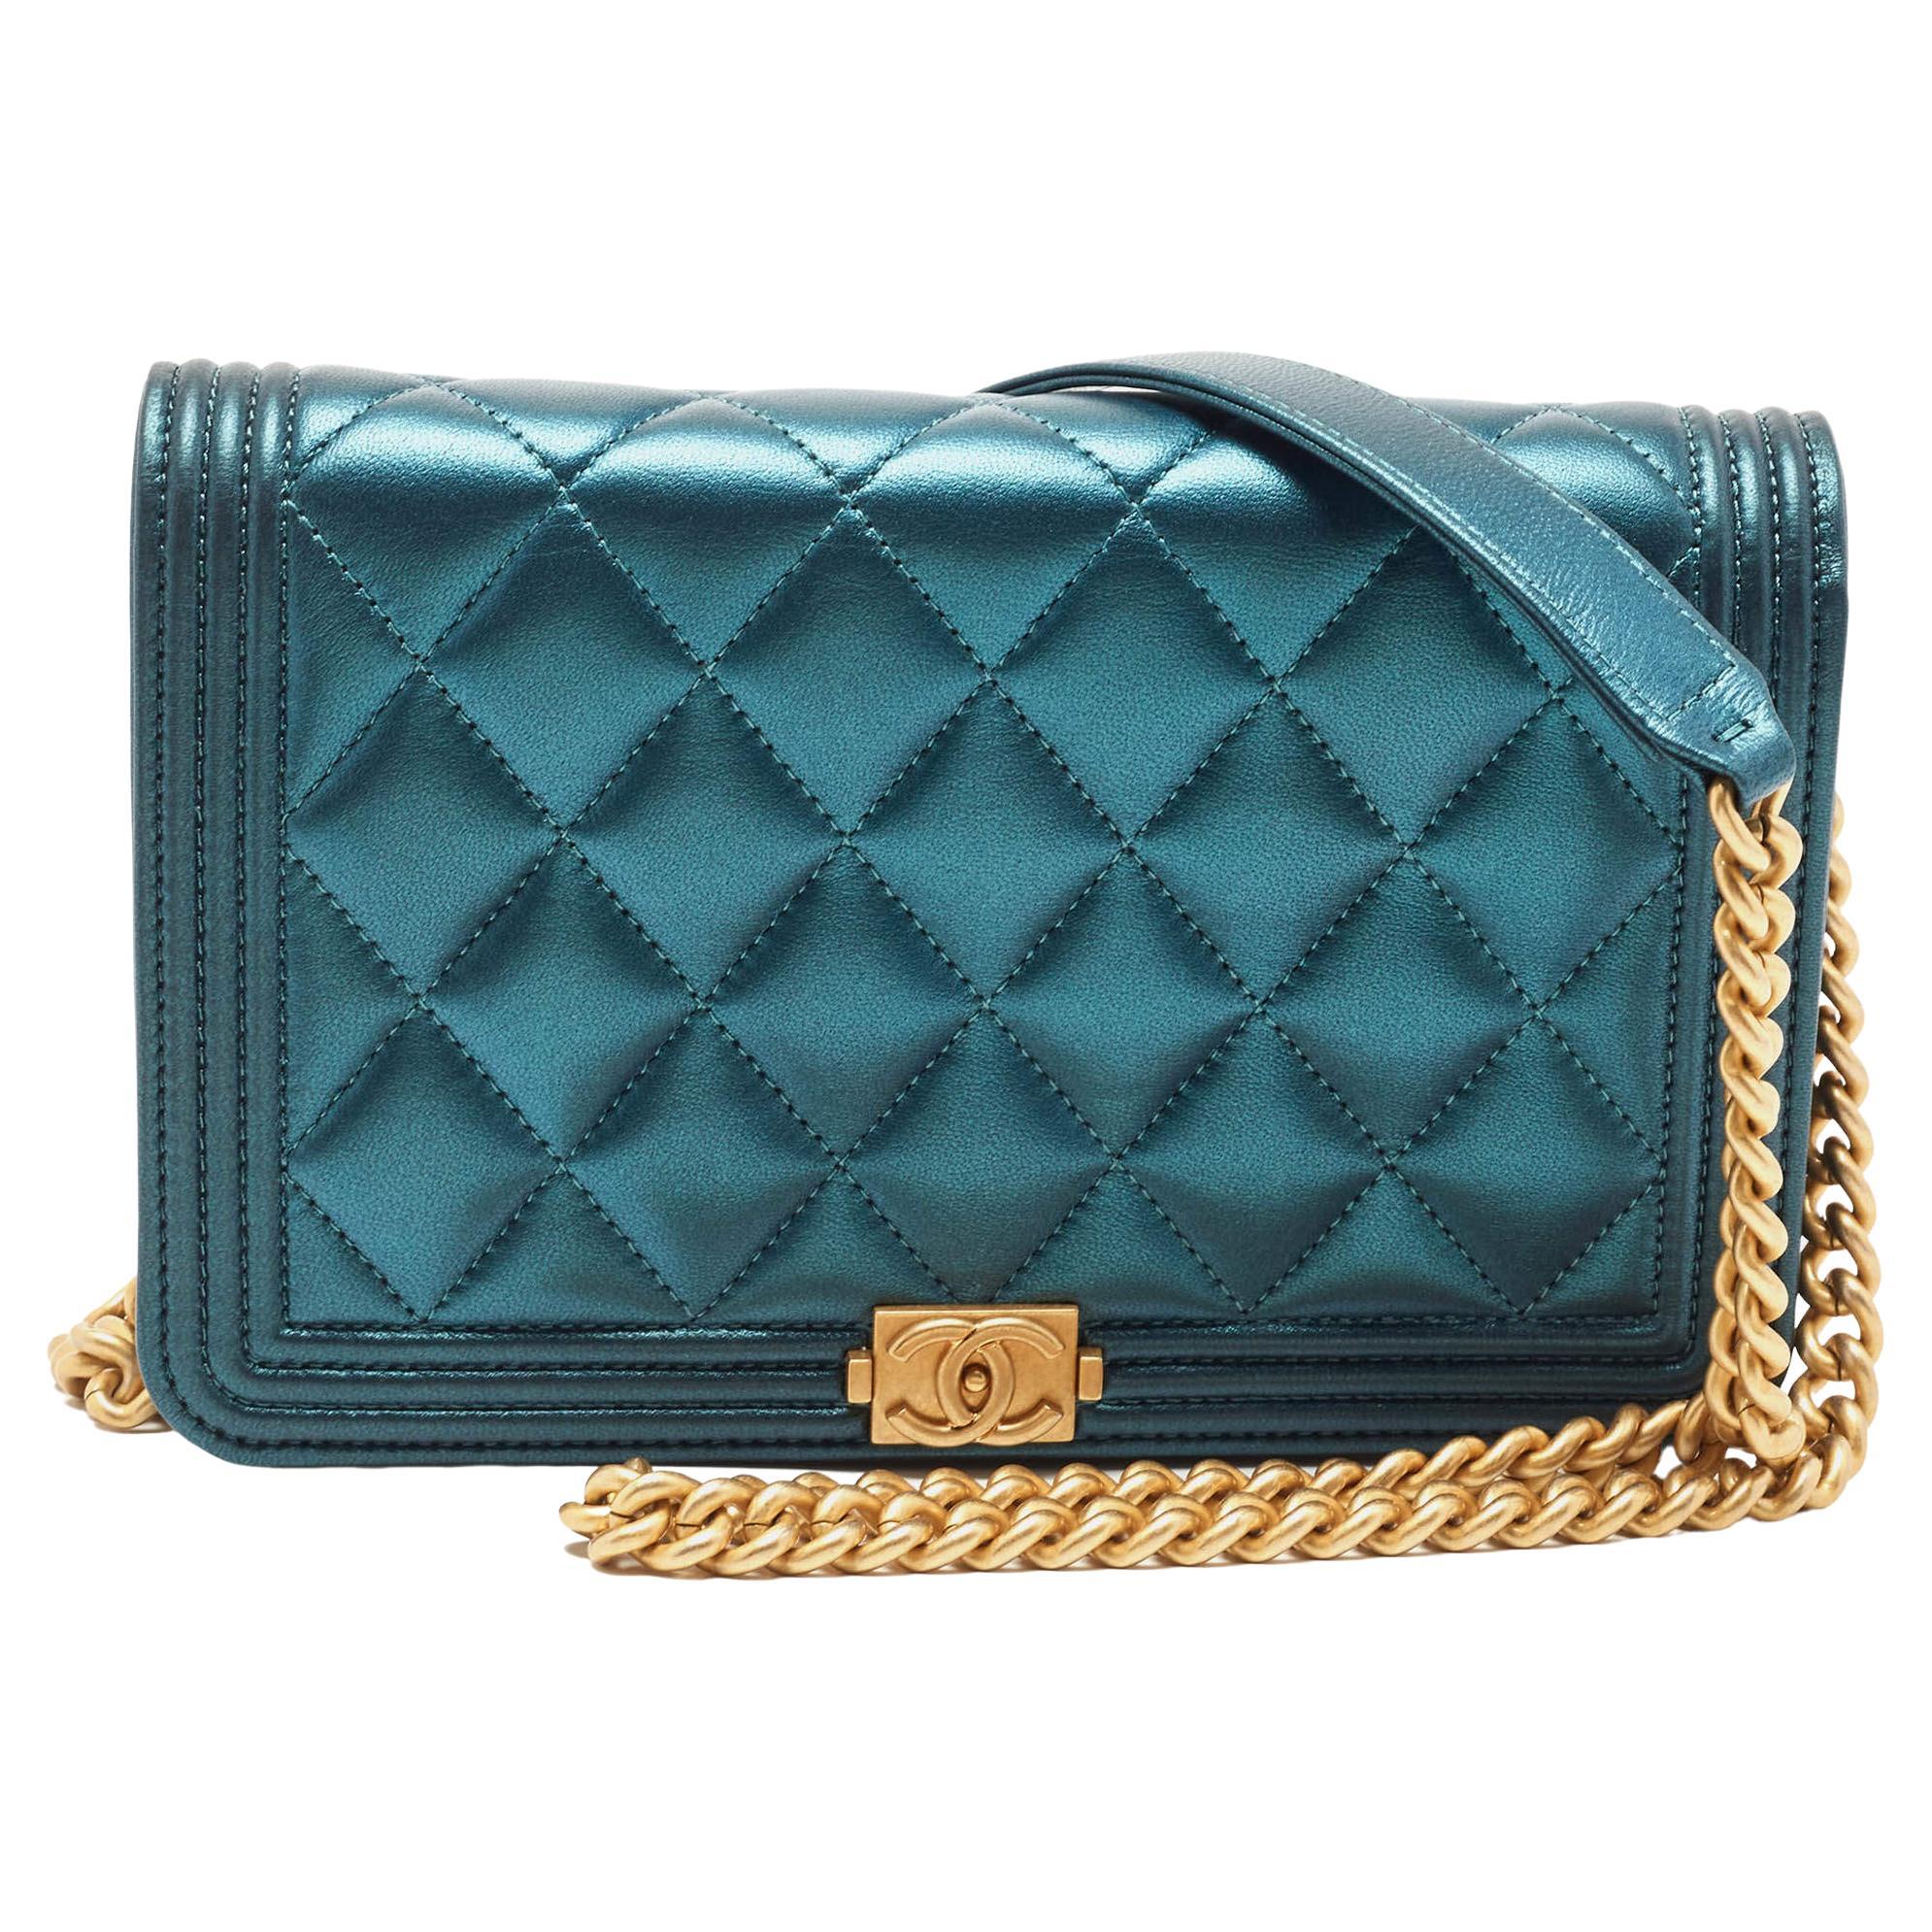 CHANEL, Bags, Nwtchanel Flap Bag With Top Handle